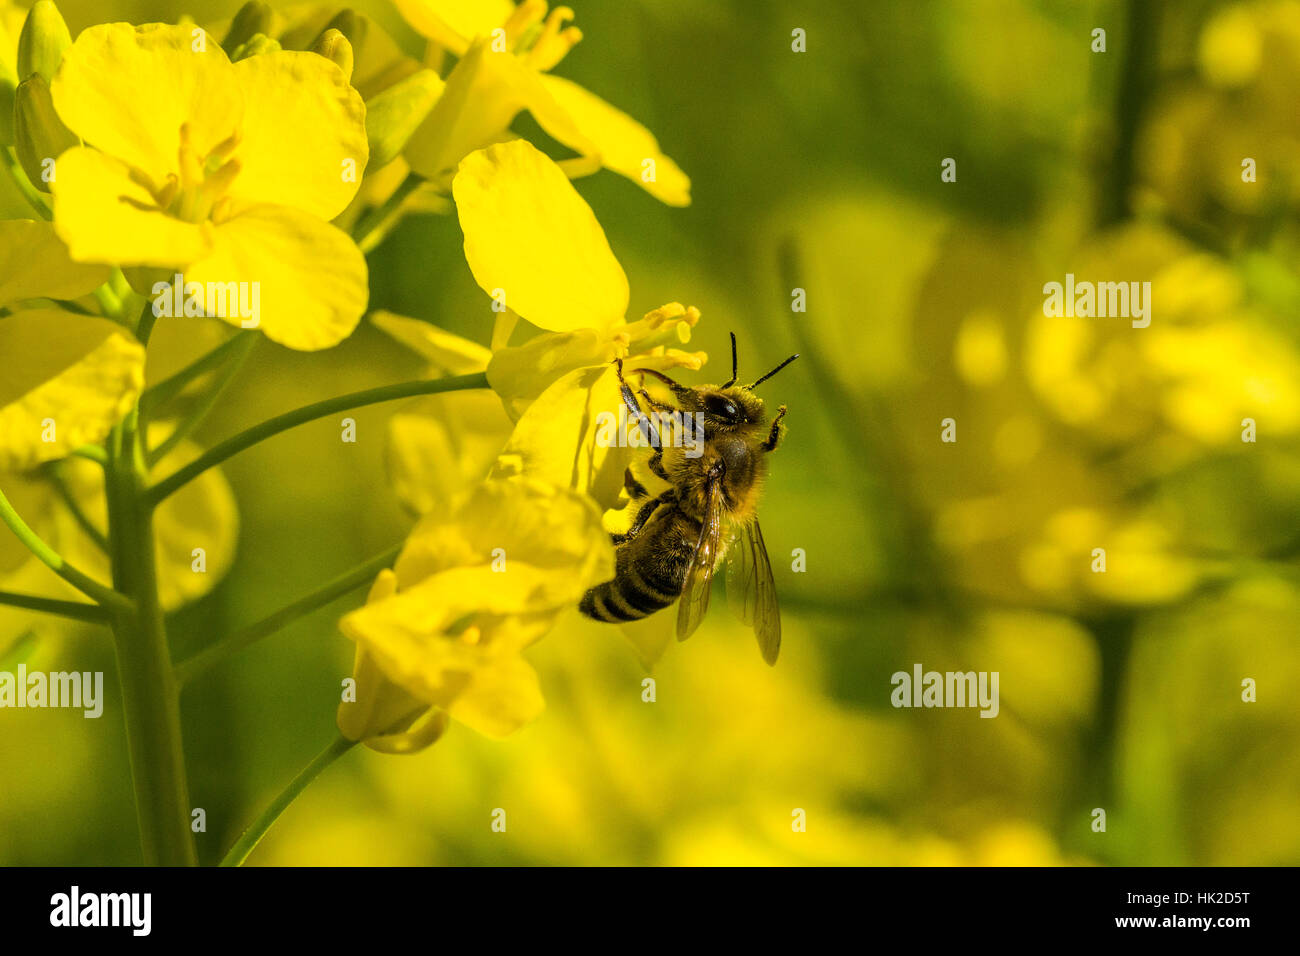 A Carniolan honey bee (Apis mellifera carnica) is collecting nectar at a yellow rapeseed blossom Stock Photo